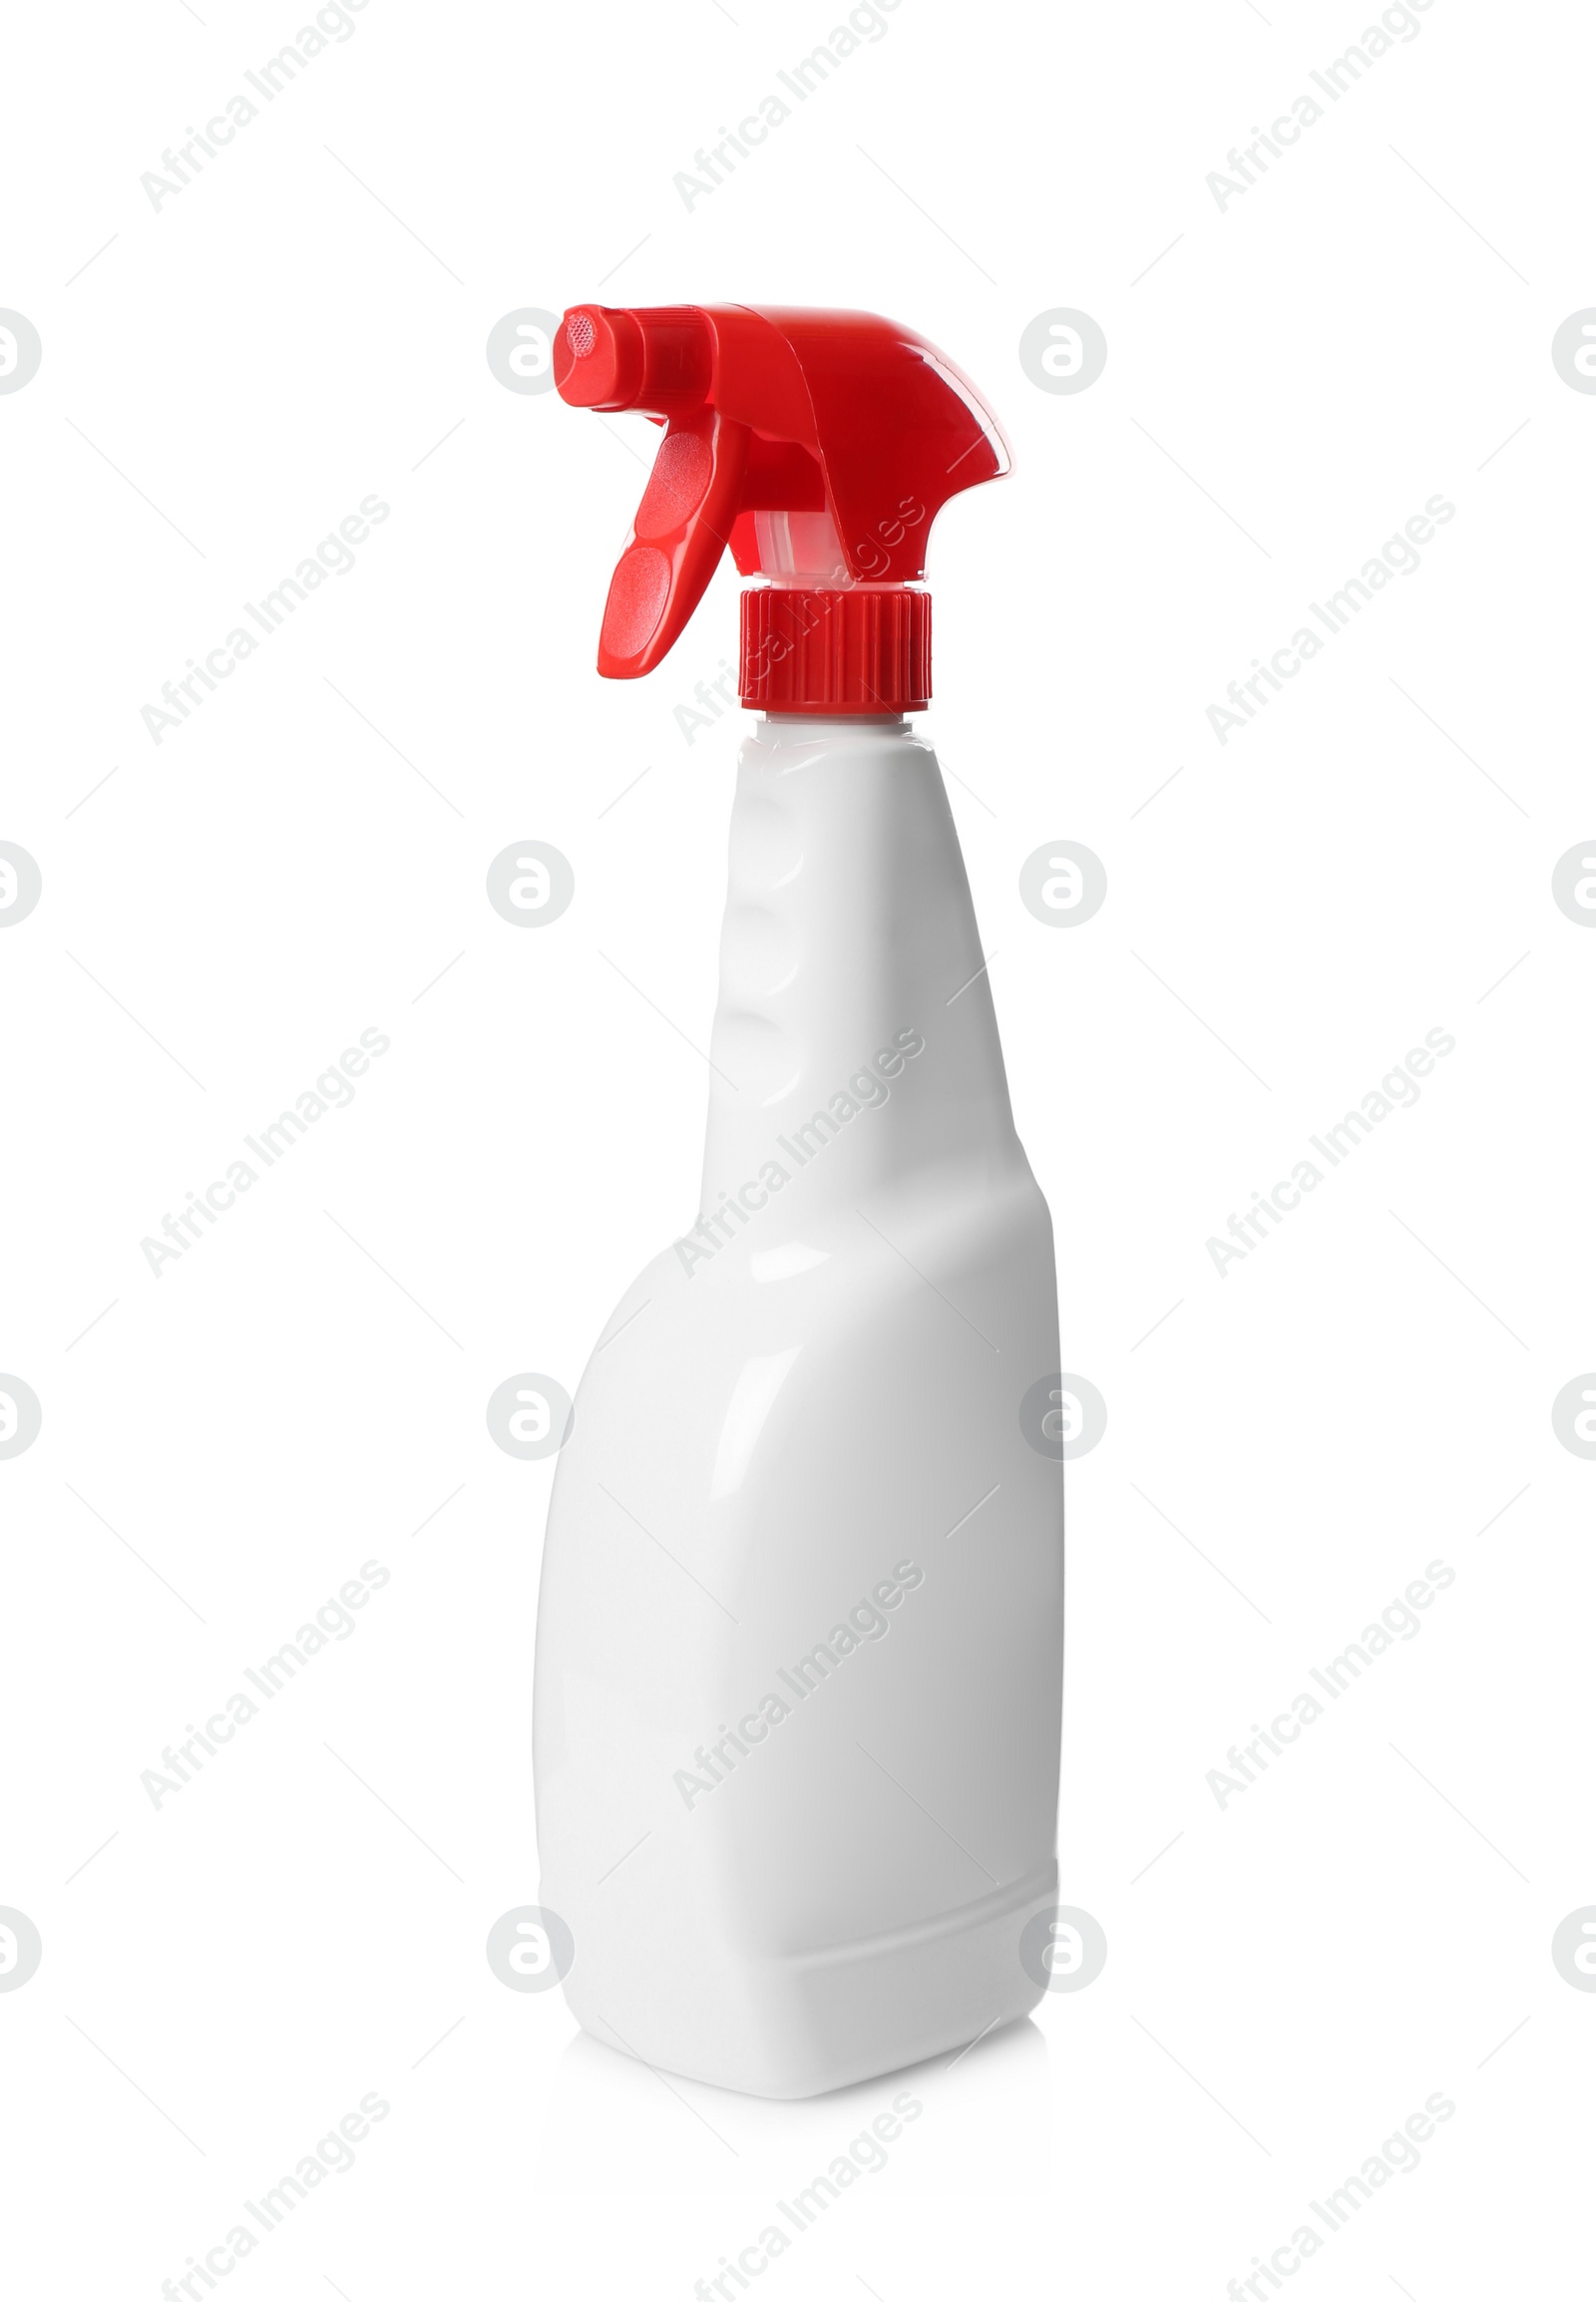 Photo of Spray bottle of cleaning product isolated on white